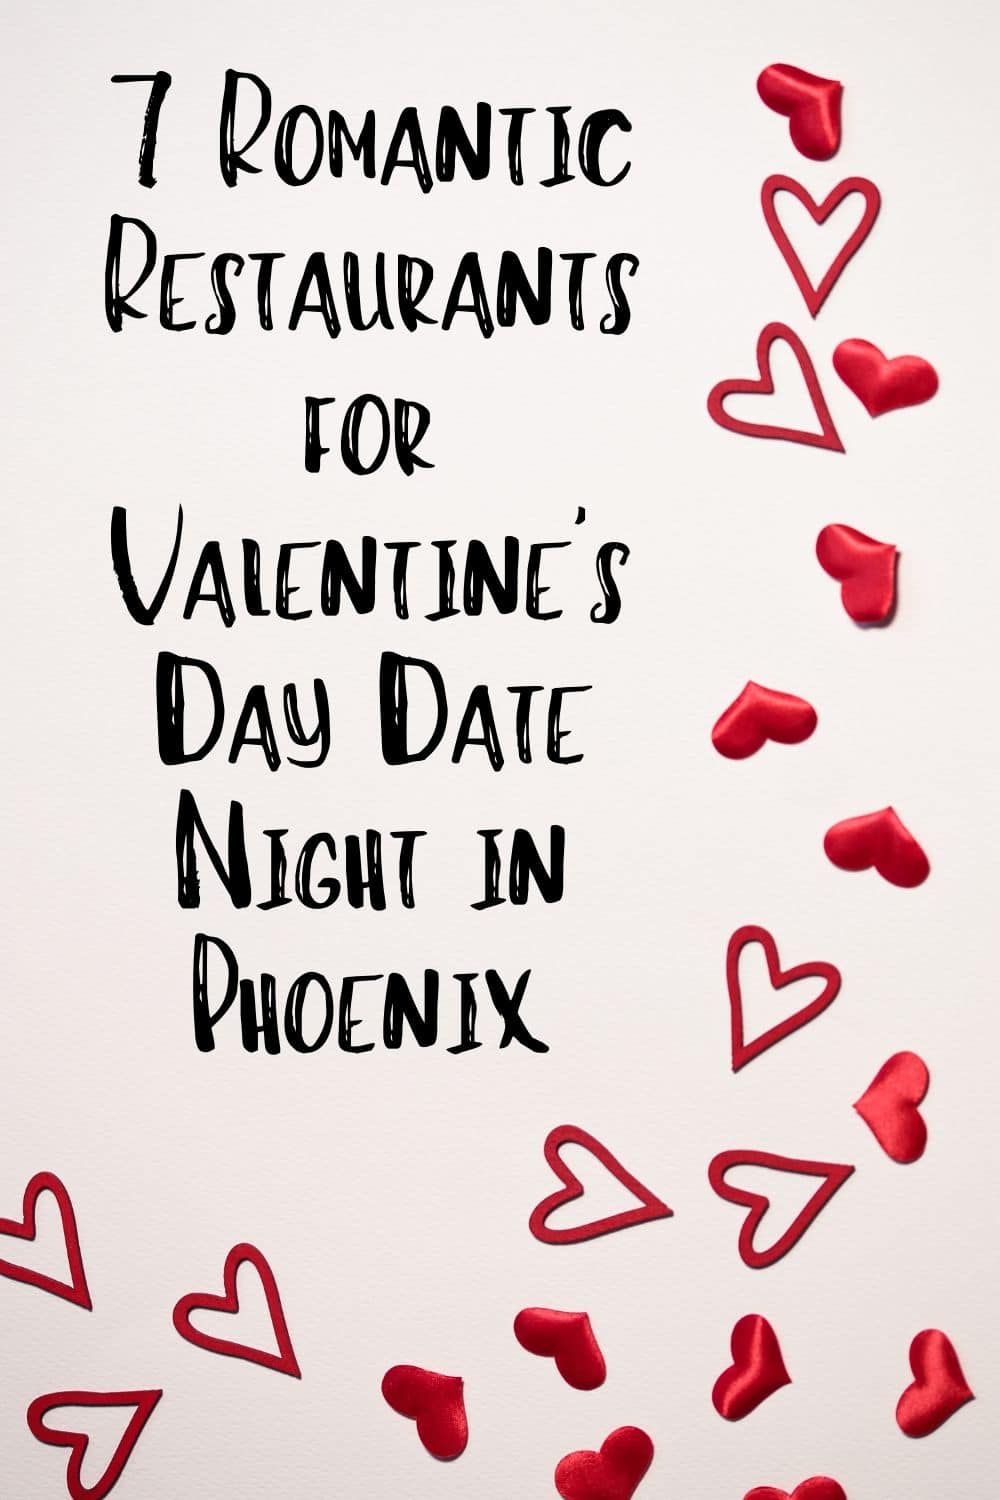 Valentine's Day in Phoenix is one of those times when you'll be glad to live in a city that has so many awesome restaurants. These Phoenix restaurants are perfect for a Valentine's Day date night!